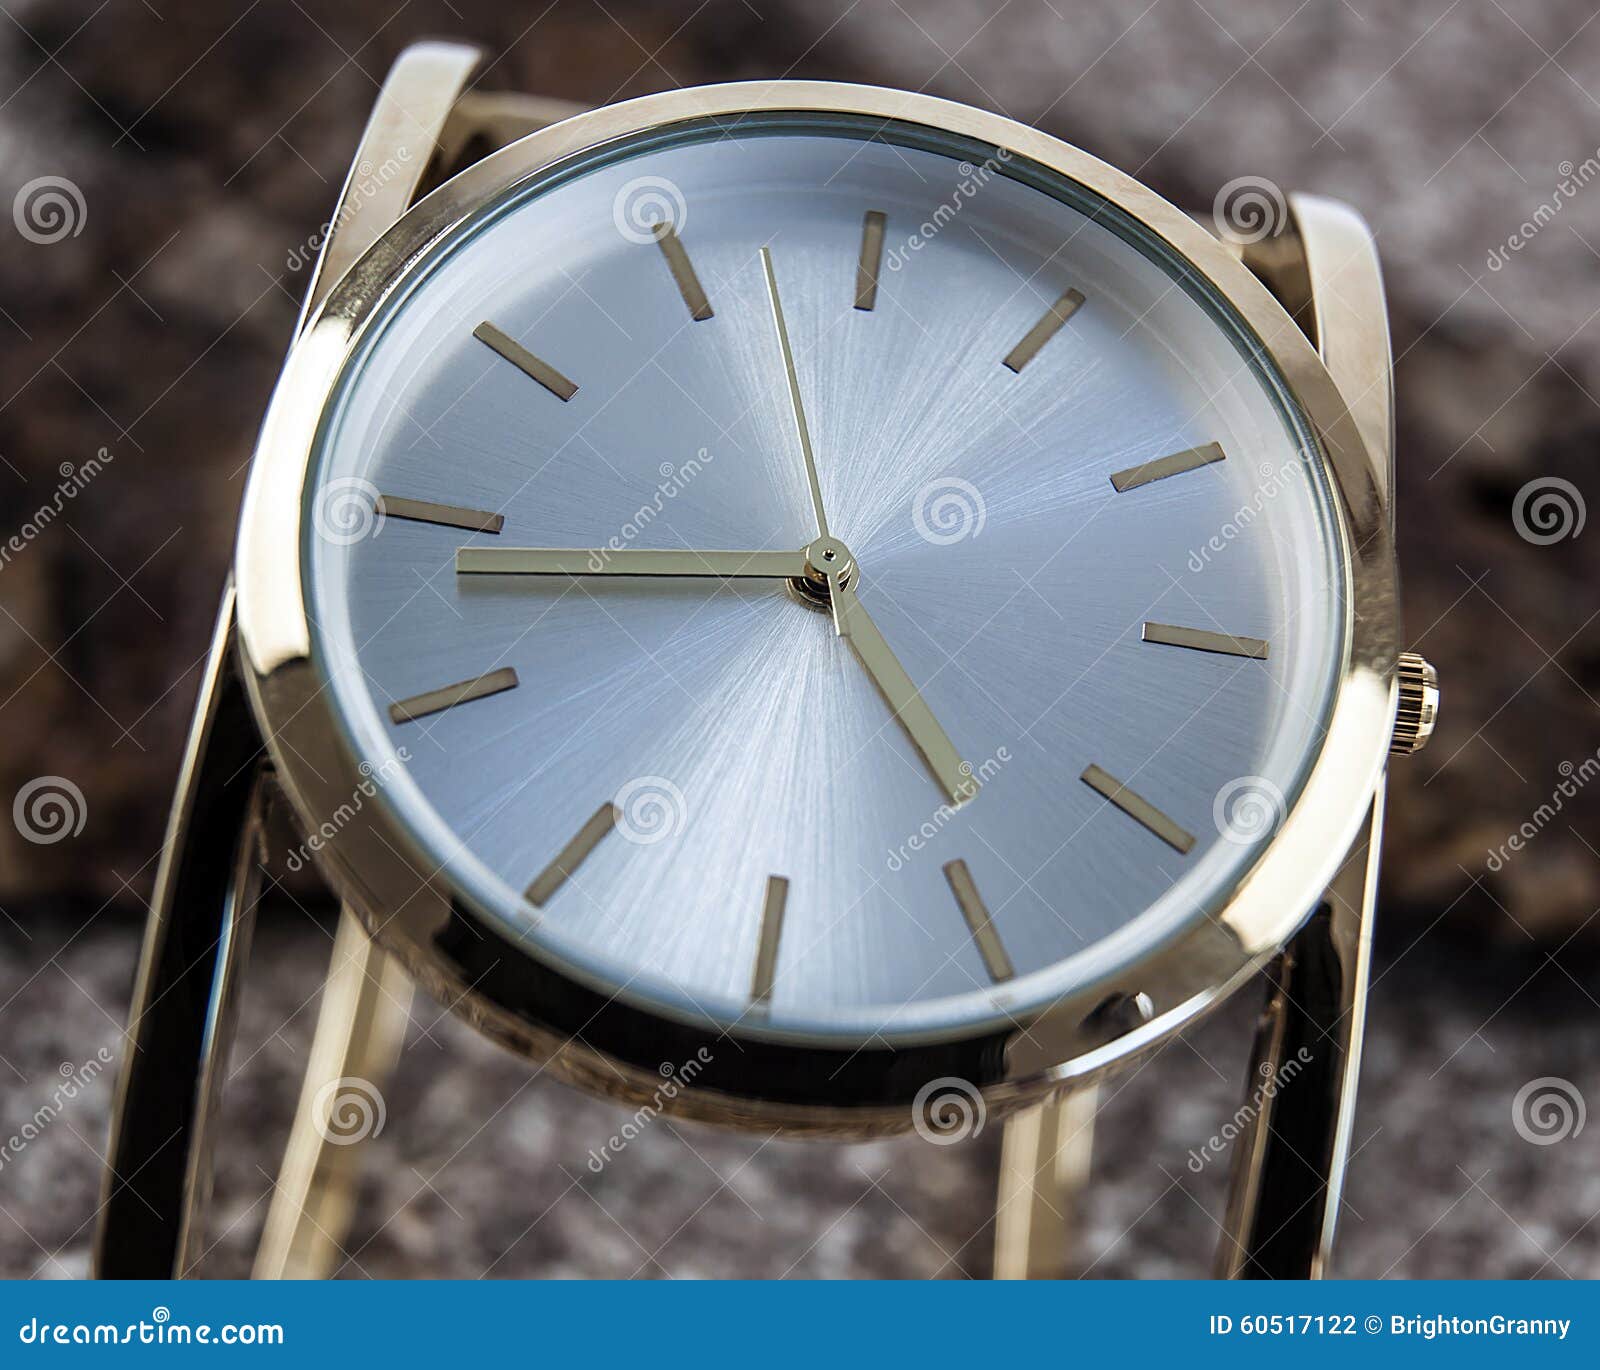 Modern watch stock photo. Image of accessory, face, hour - 60517122